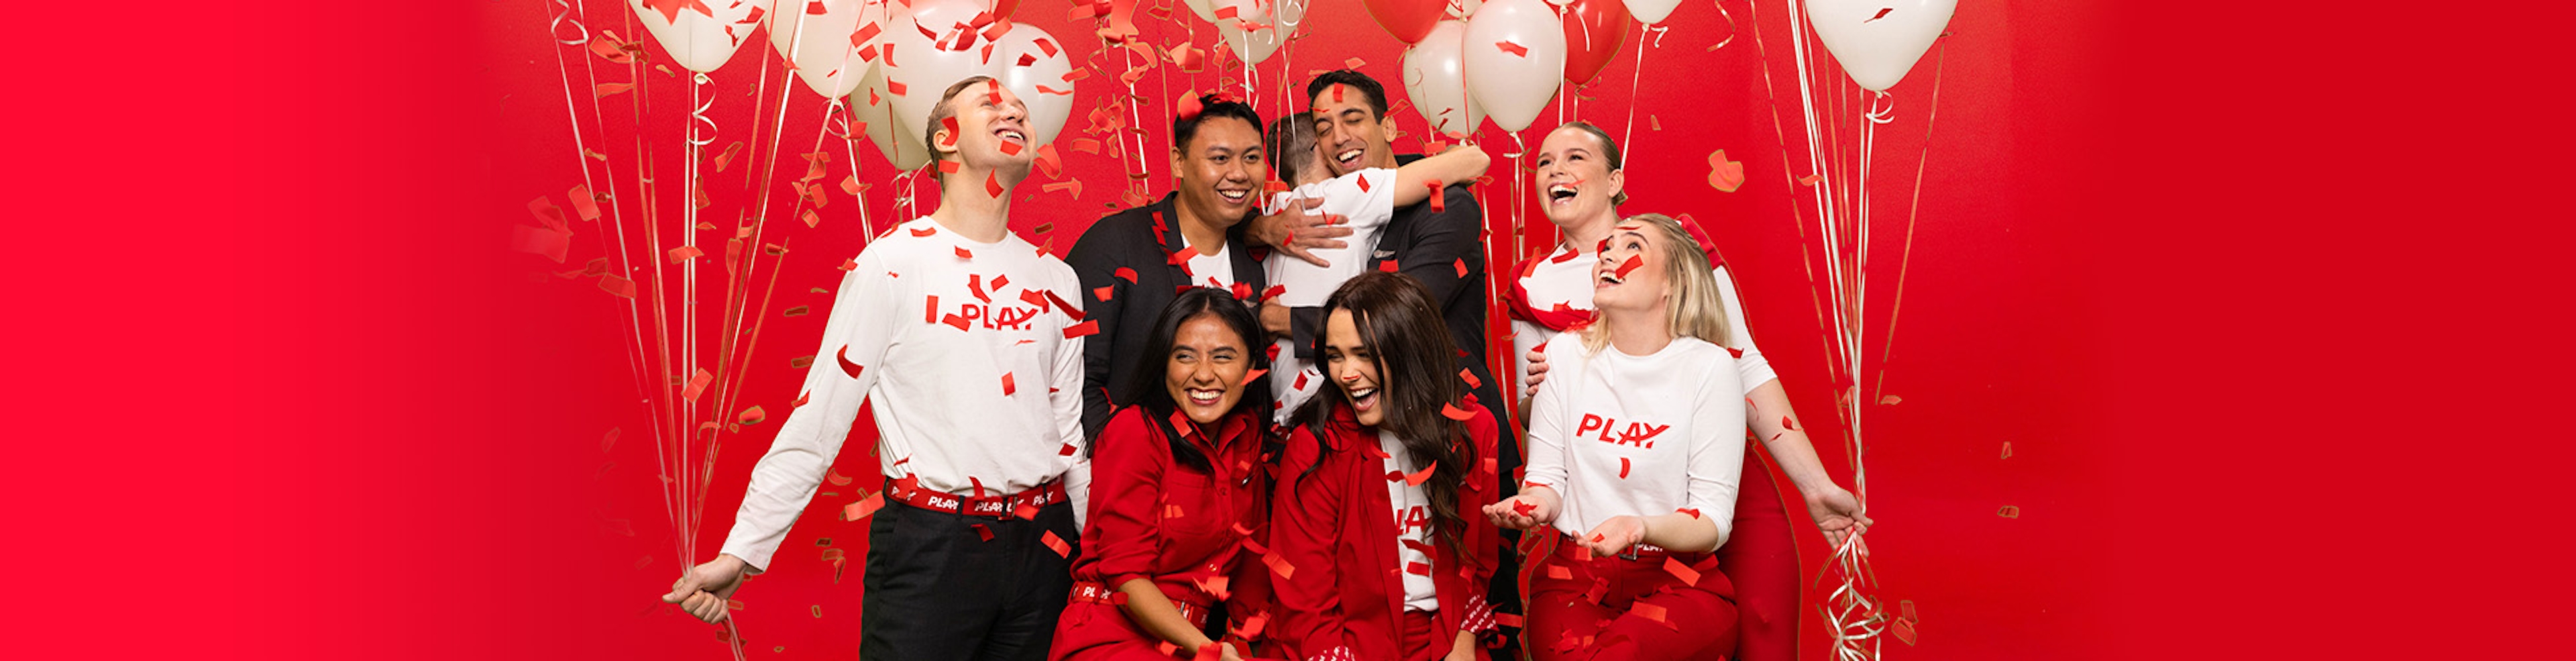 PLAY crew members celebrating with balloons in front of a red background